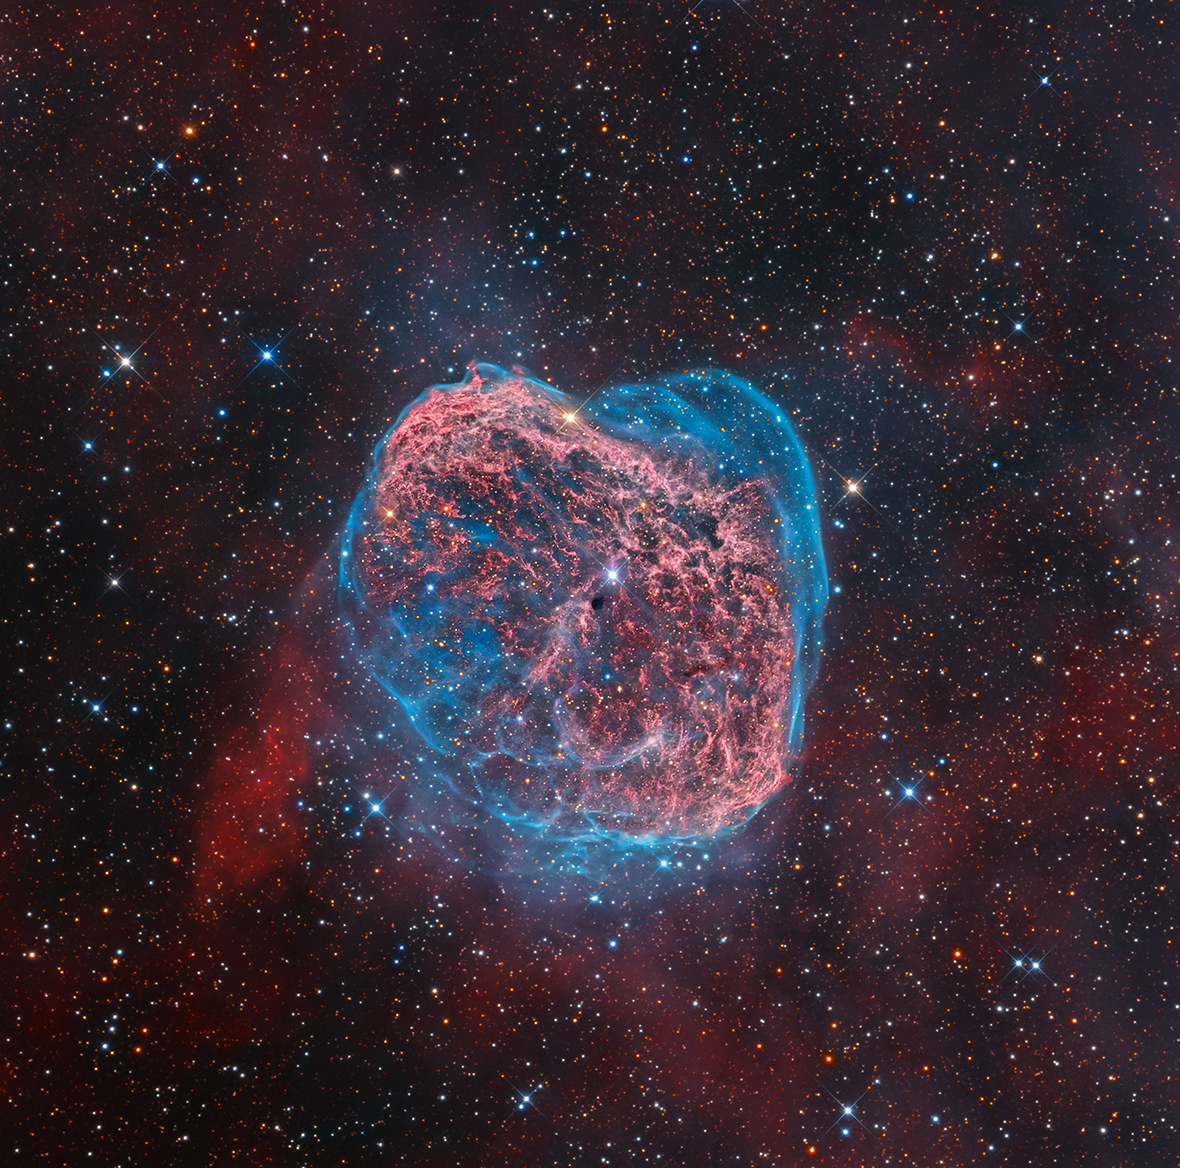 NGC 6888 by Mark Hanson (USA). This colourful starscape taken from Rancho Hidalgo, New Mexico, USA reveals the searing heat of the Crescent Nebula glowing in a whirl of red and blue. The emission nebula is a colossal shell of material ejected from a powerful but short-lived Wolf-Rayet star (WR 136), seen close to the image centre. Ultraviolet radiation and stellar wind now heats the swelling cloud, causing it to glow.